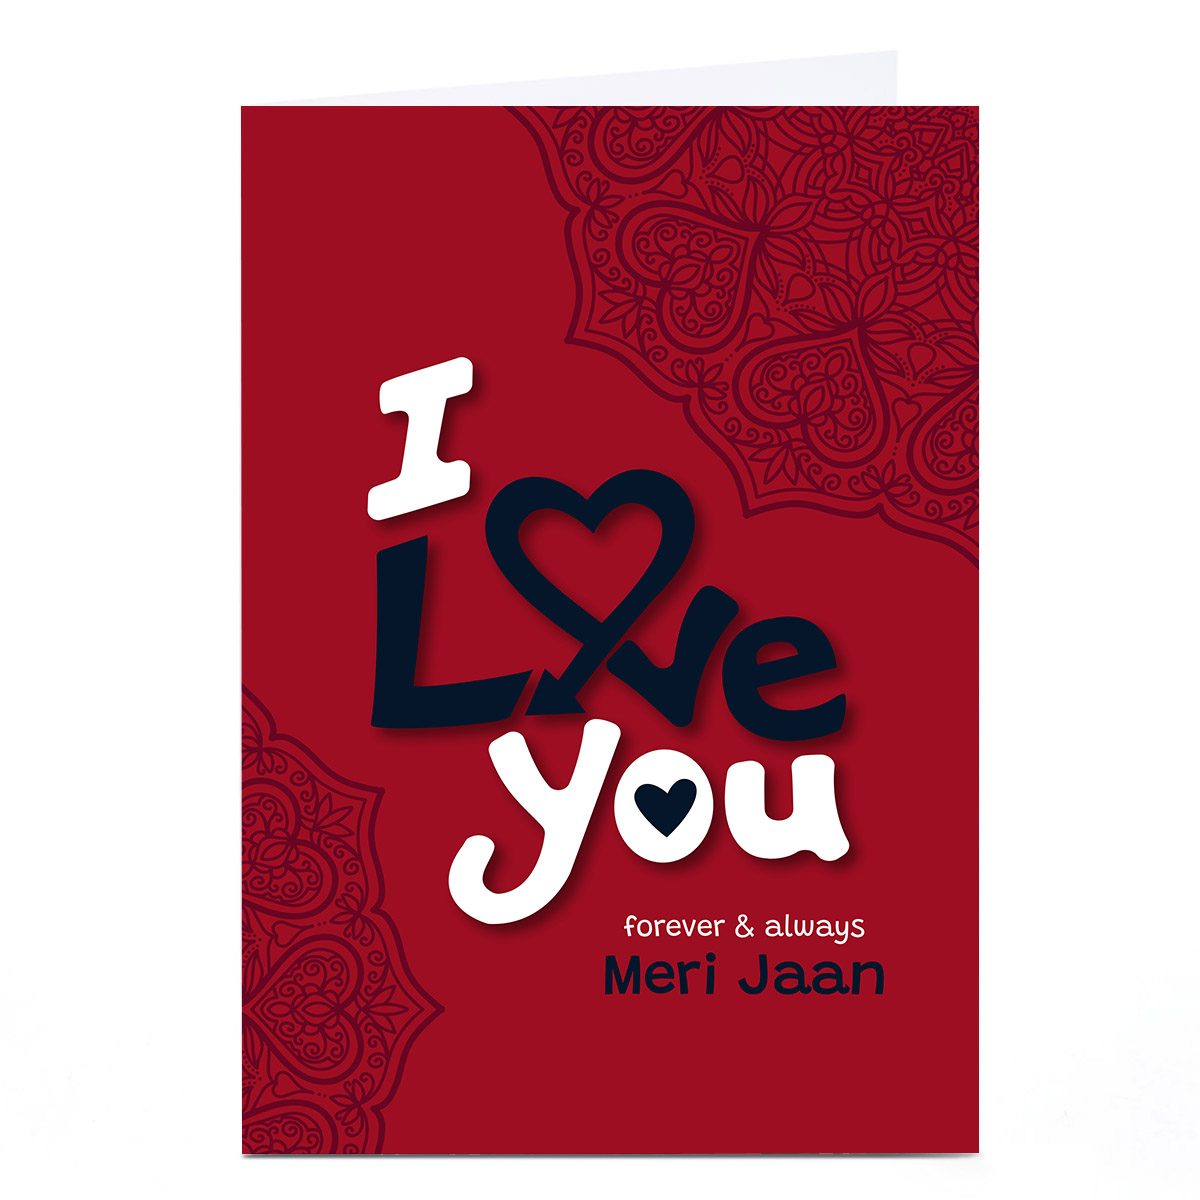 Personalised Roshah Designs Valentine's Day Card - Forever & Always